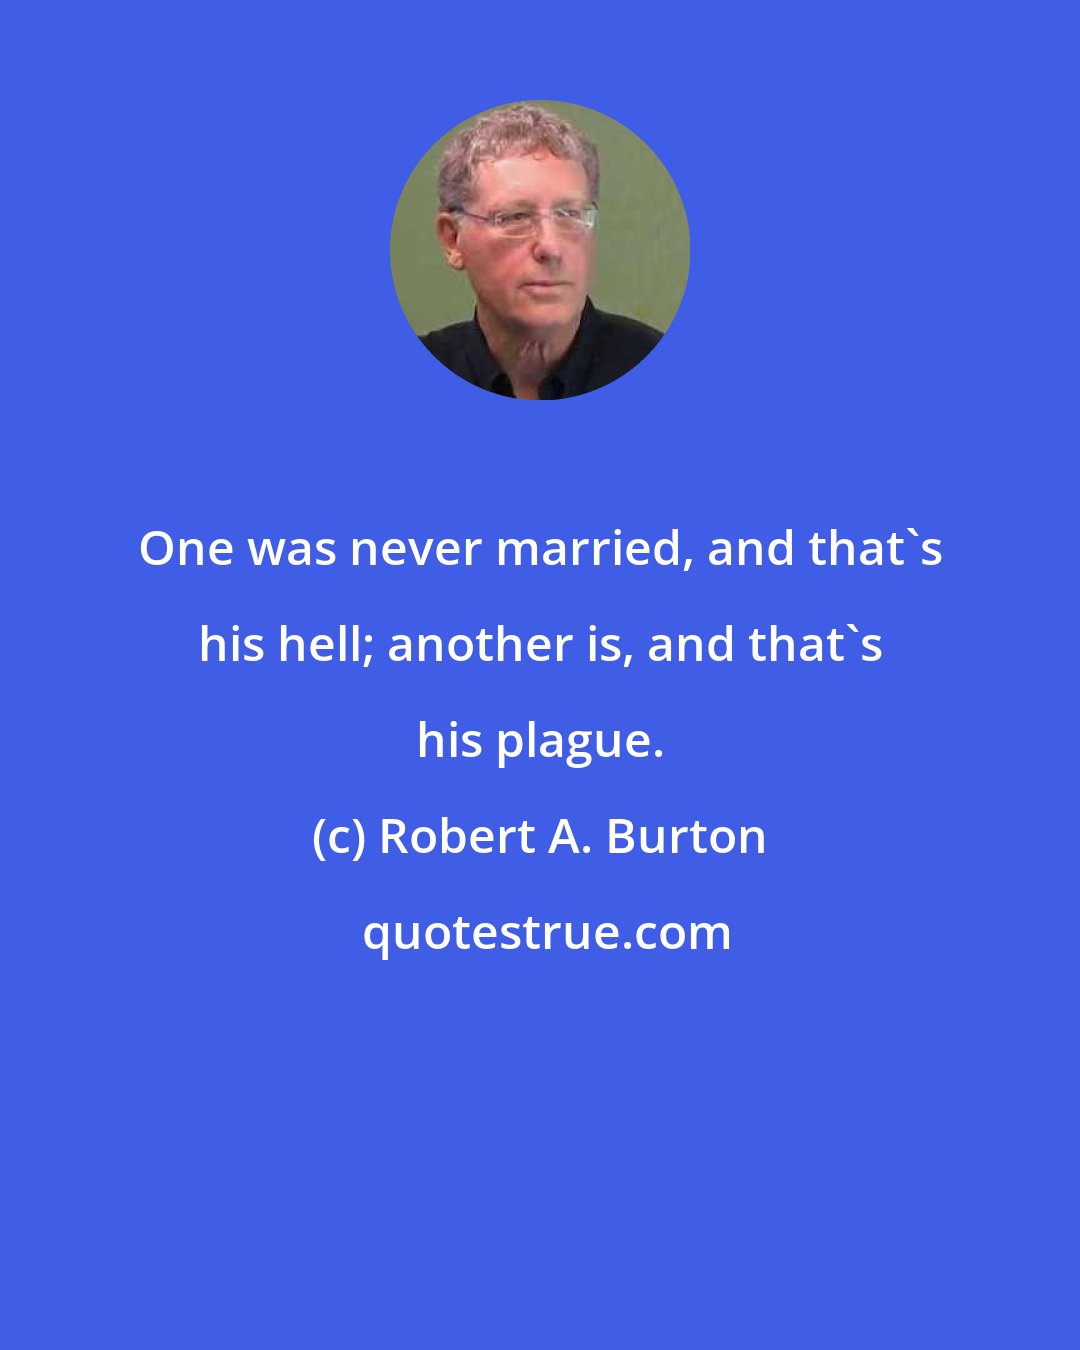 Robert A. Burton: One was never married, and that's his hell; another is, and that's his plague.